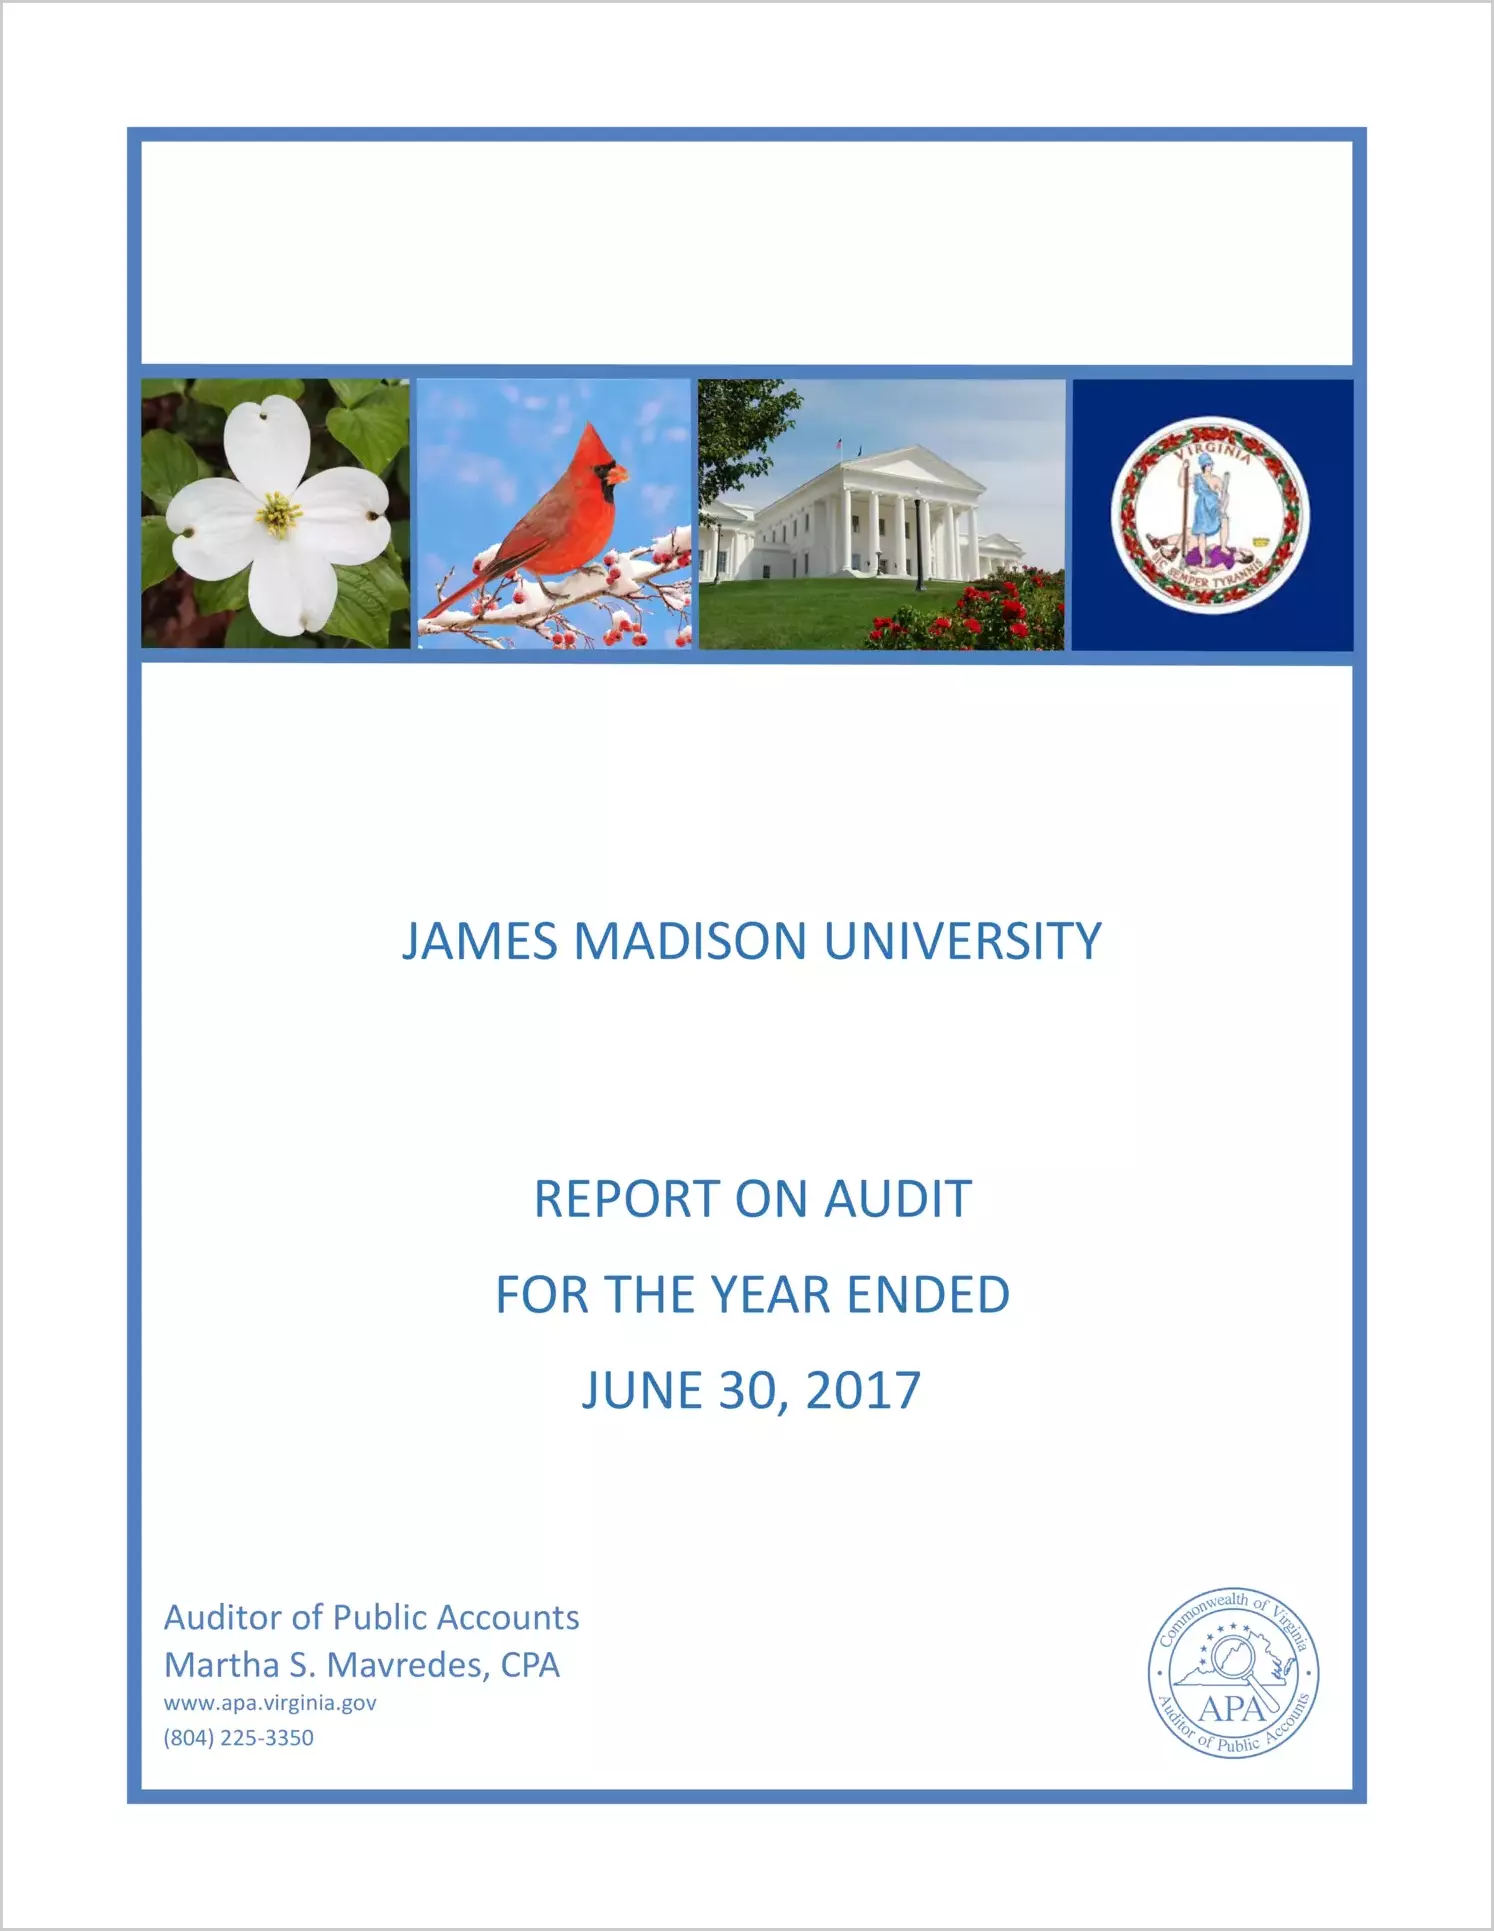 James Madison University for the year ended June 30, 2017